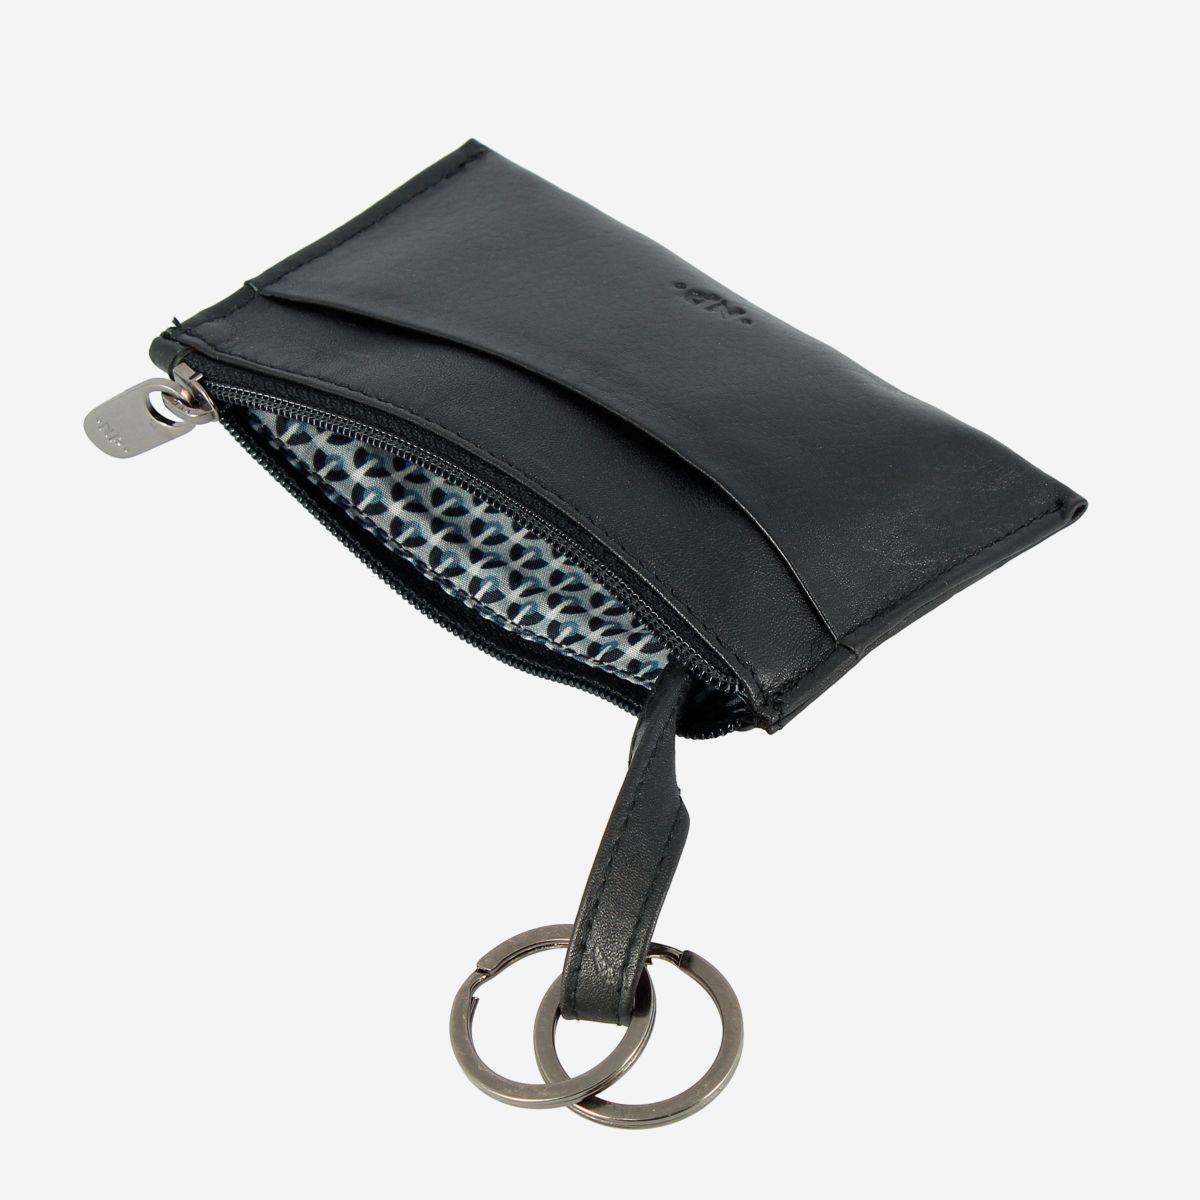 Leather Coin Purse - Black